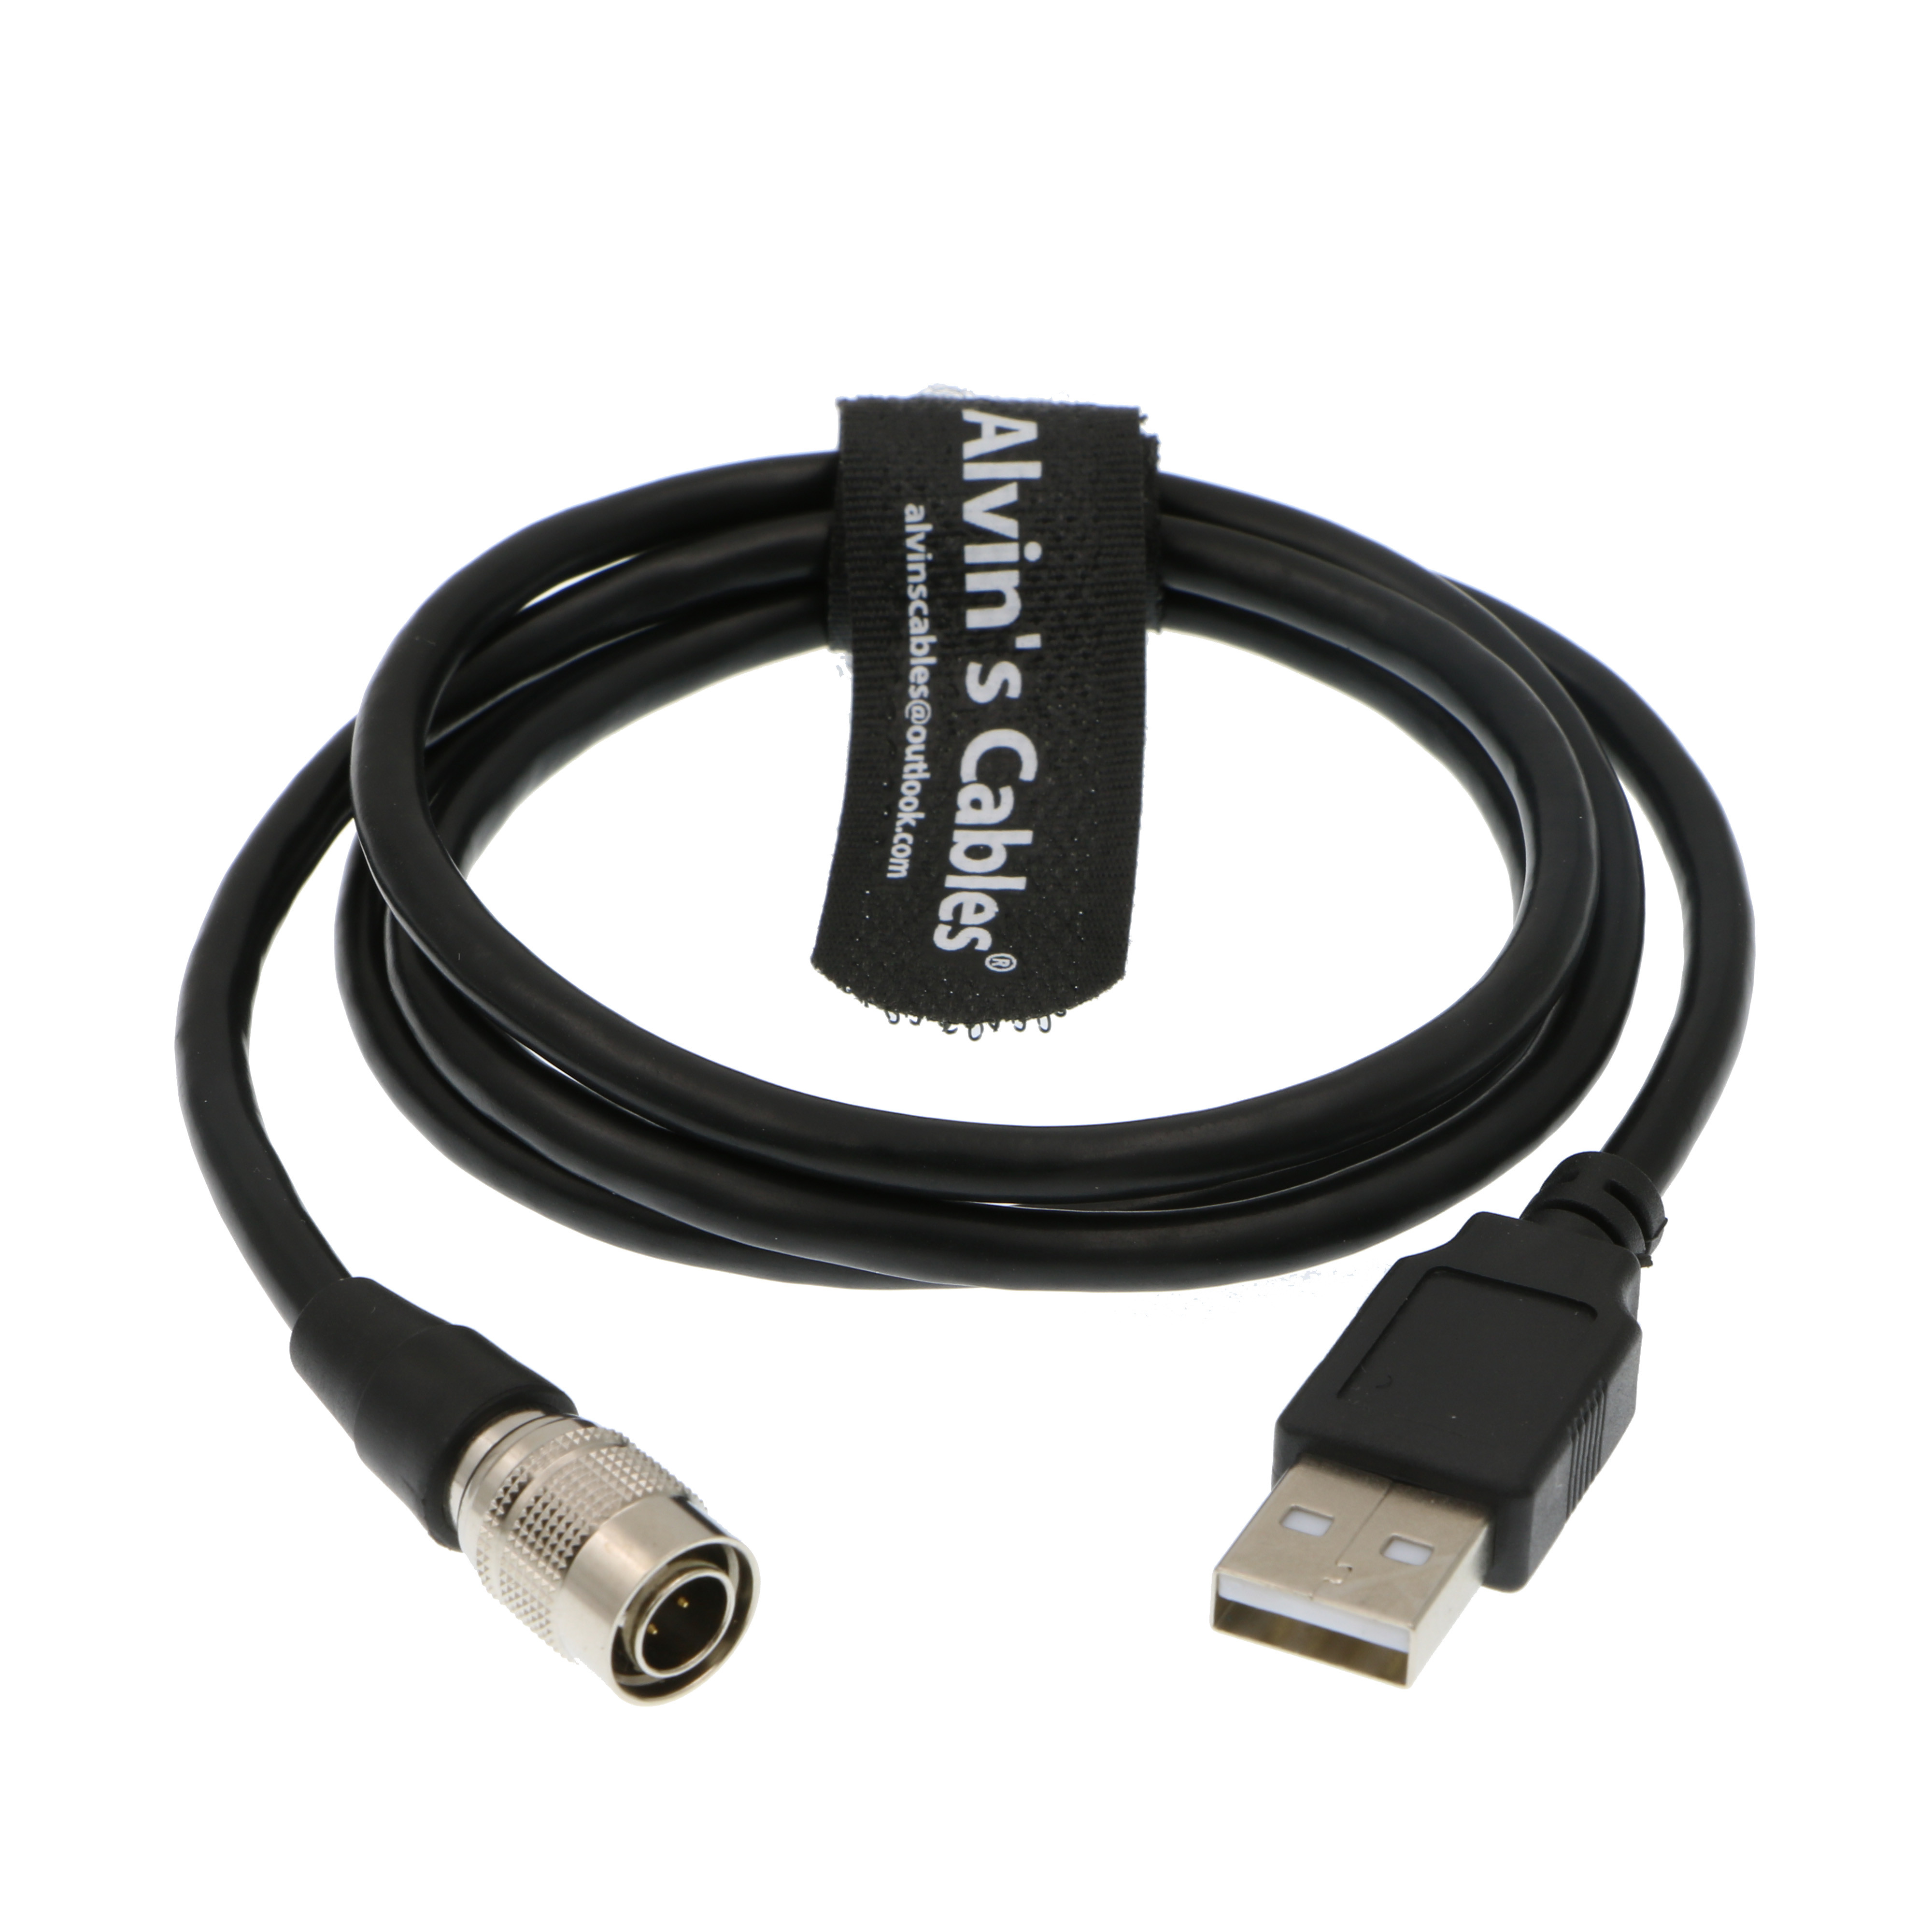  4 Pin Hirose Male to USB Data Cable for Camera for Windows7 and Windows8 Manufactures